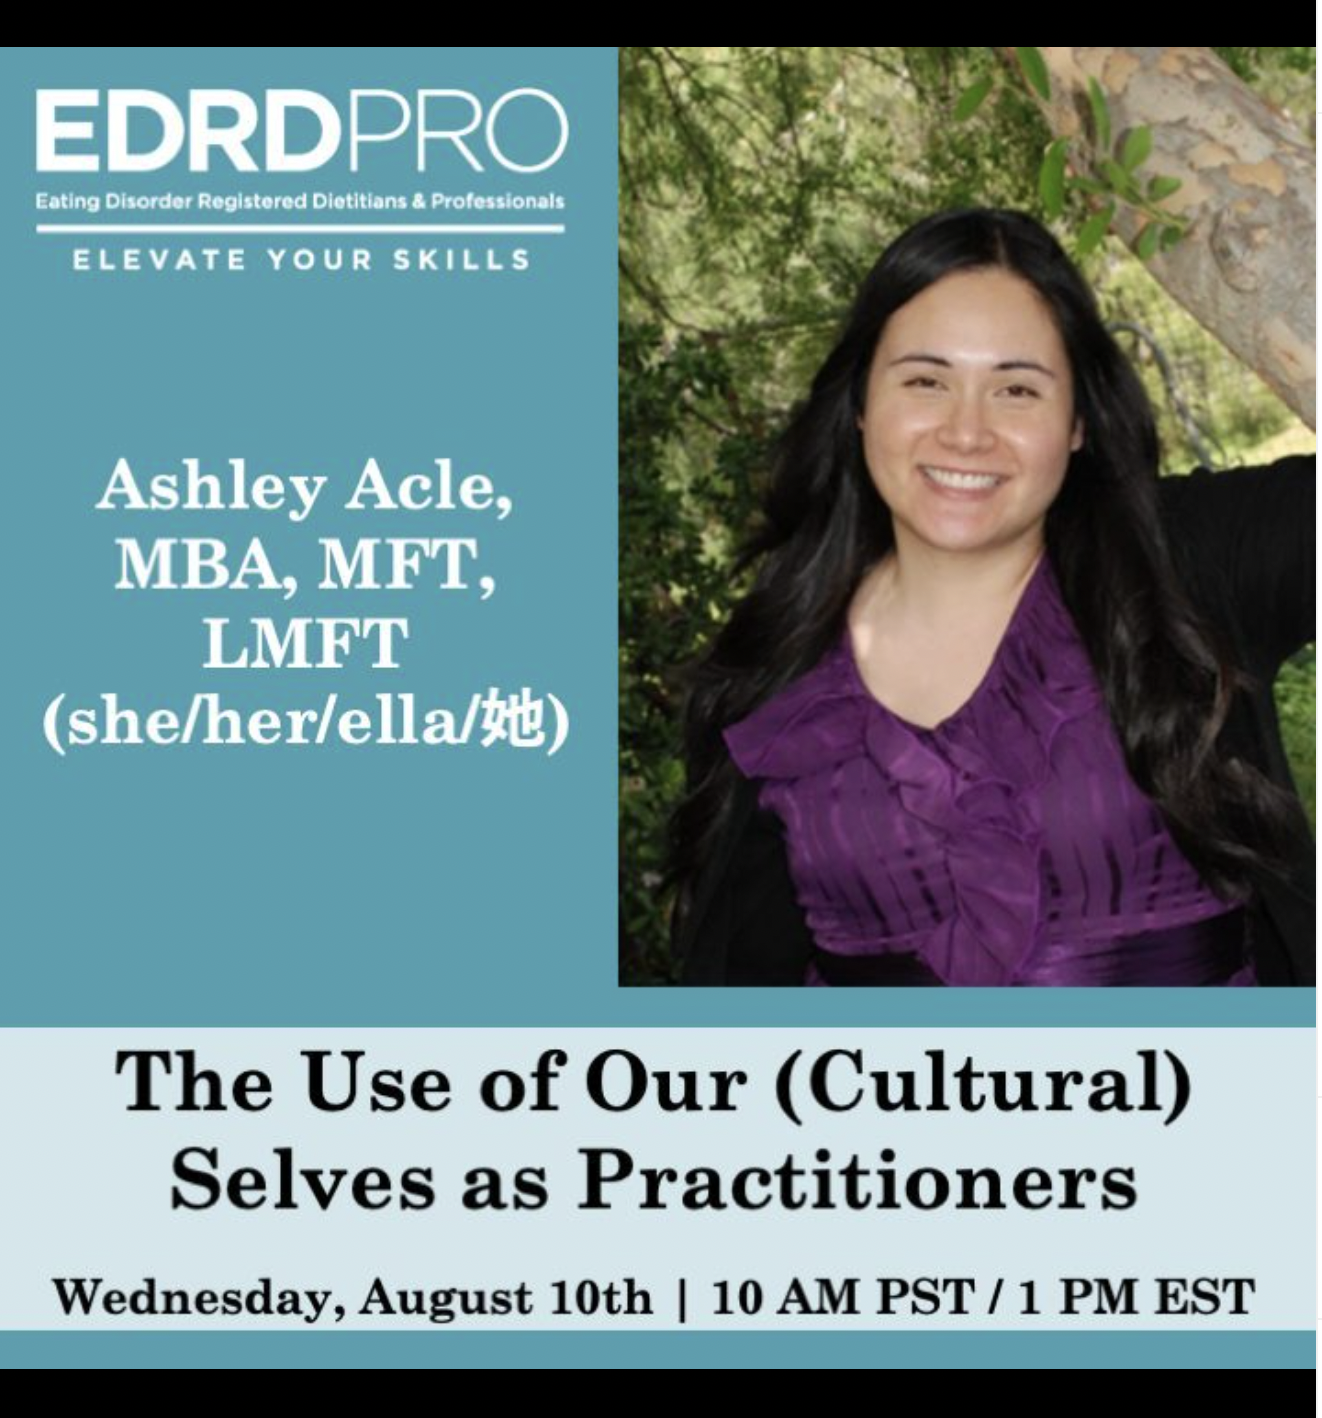 EDRDPro The Use of Our (Cultural) Selves as Practioners